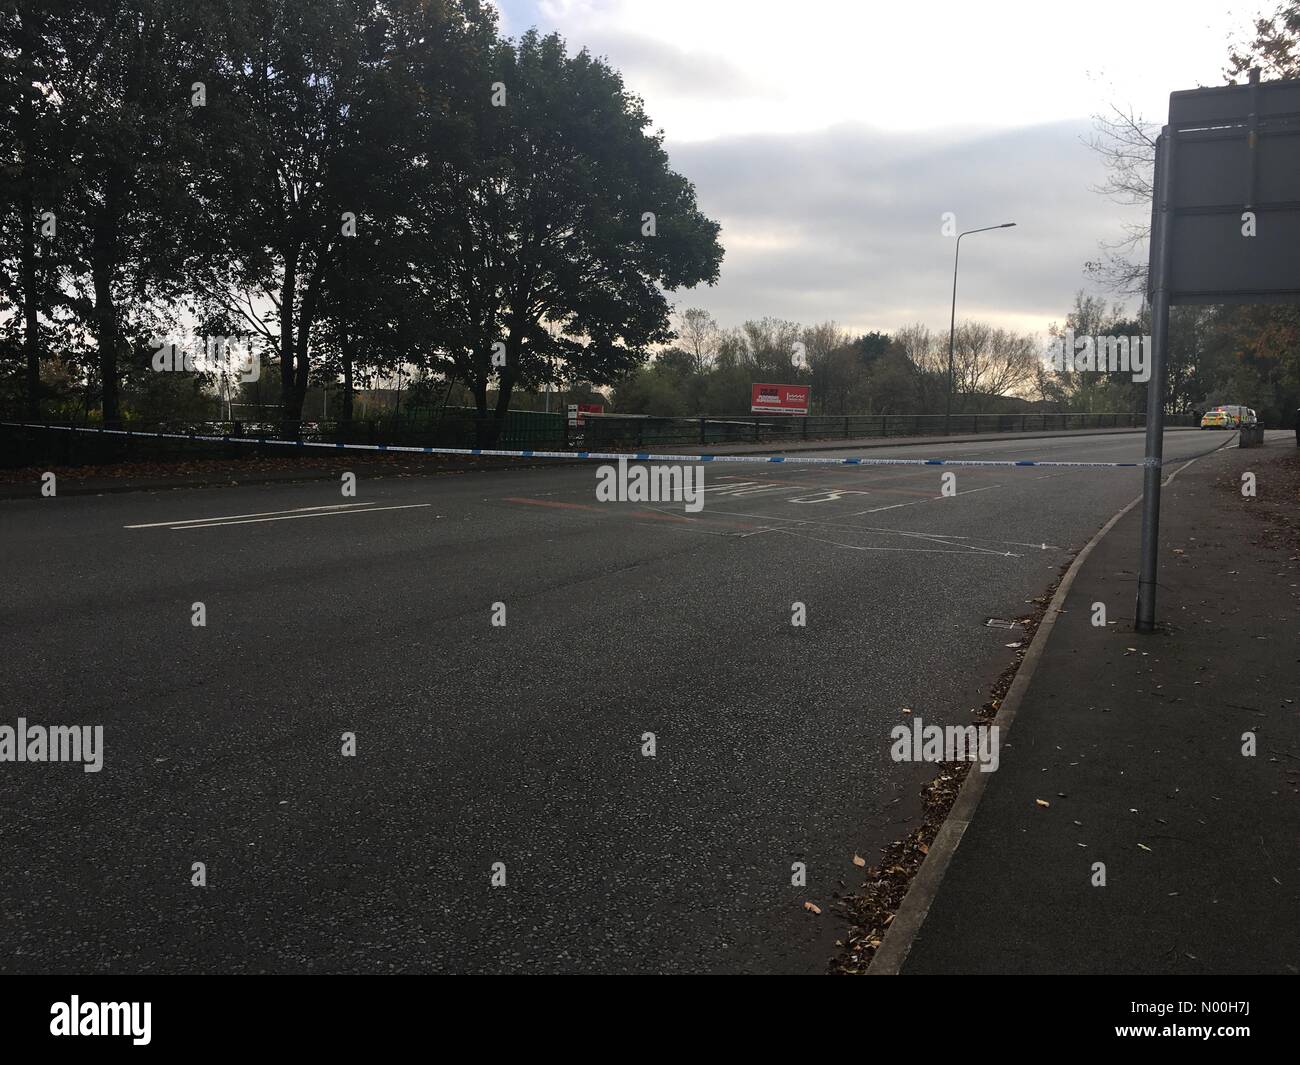 Greater Manchester police attend Attempted suicide on leigh bridge, Leigh, greater Manchester, uk Credit: Black Capture/StockimoNews/Alamy Live News Stock Photo